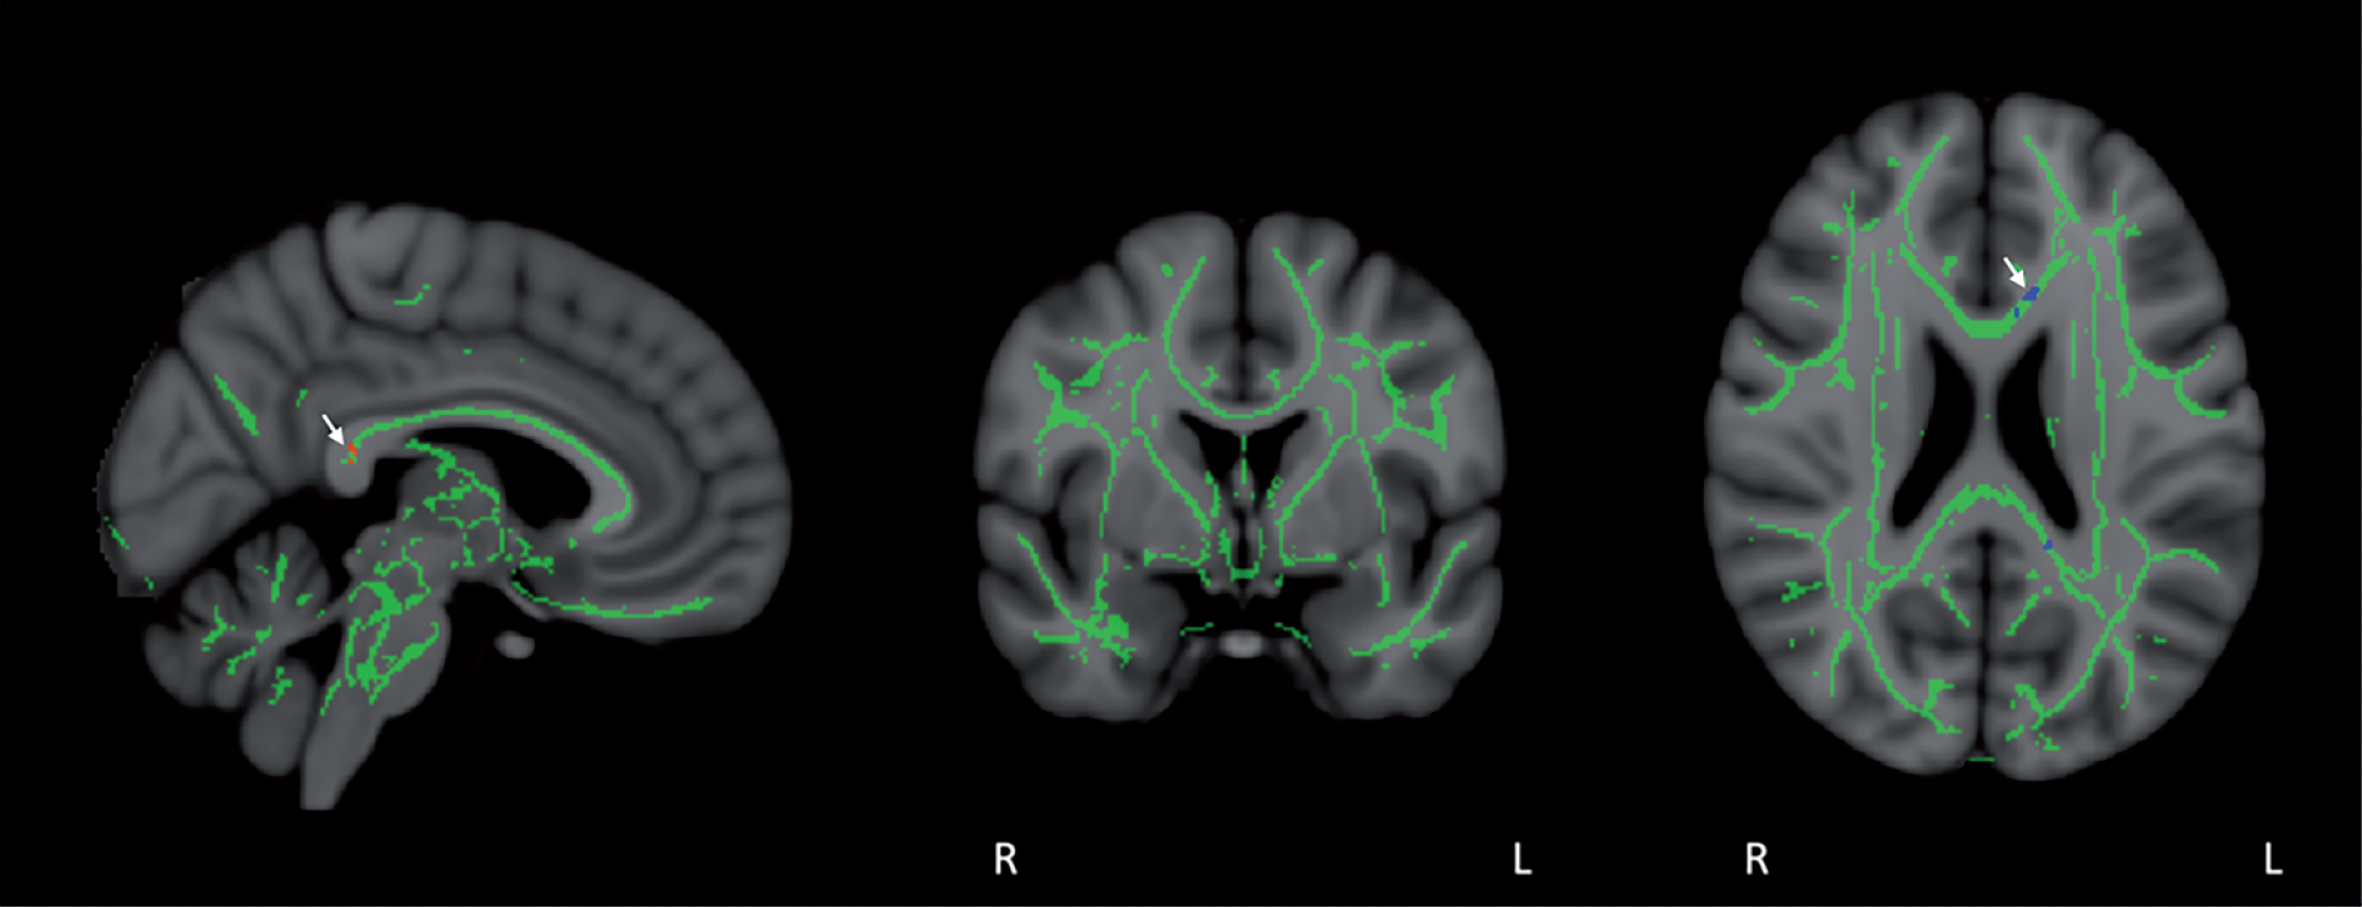 Co-registration of DTI-derived fractional anisotropy (FA) images via tract-based spatial statistics (TBSS) resulted in a skeleton containing all major FA tracts common to all eight subjects, as shown in mid-sagittal, coronal, and horizontal sections. FA values were then compared in a voxel-by-voxel analysis for group differences between Baseline and Day60 (end of treatment). FA stability was evident during the treatment period, with only a small group of voxels in the posterior cingulate/cingulate and corpus callosum (arrows) exhibiting significant FA enhancement (red voxels) or FA reduction (blue voxels) for all eight subjects collectively (p < 0.05).